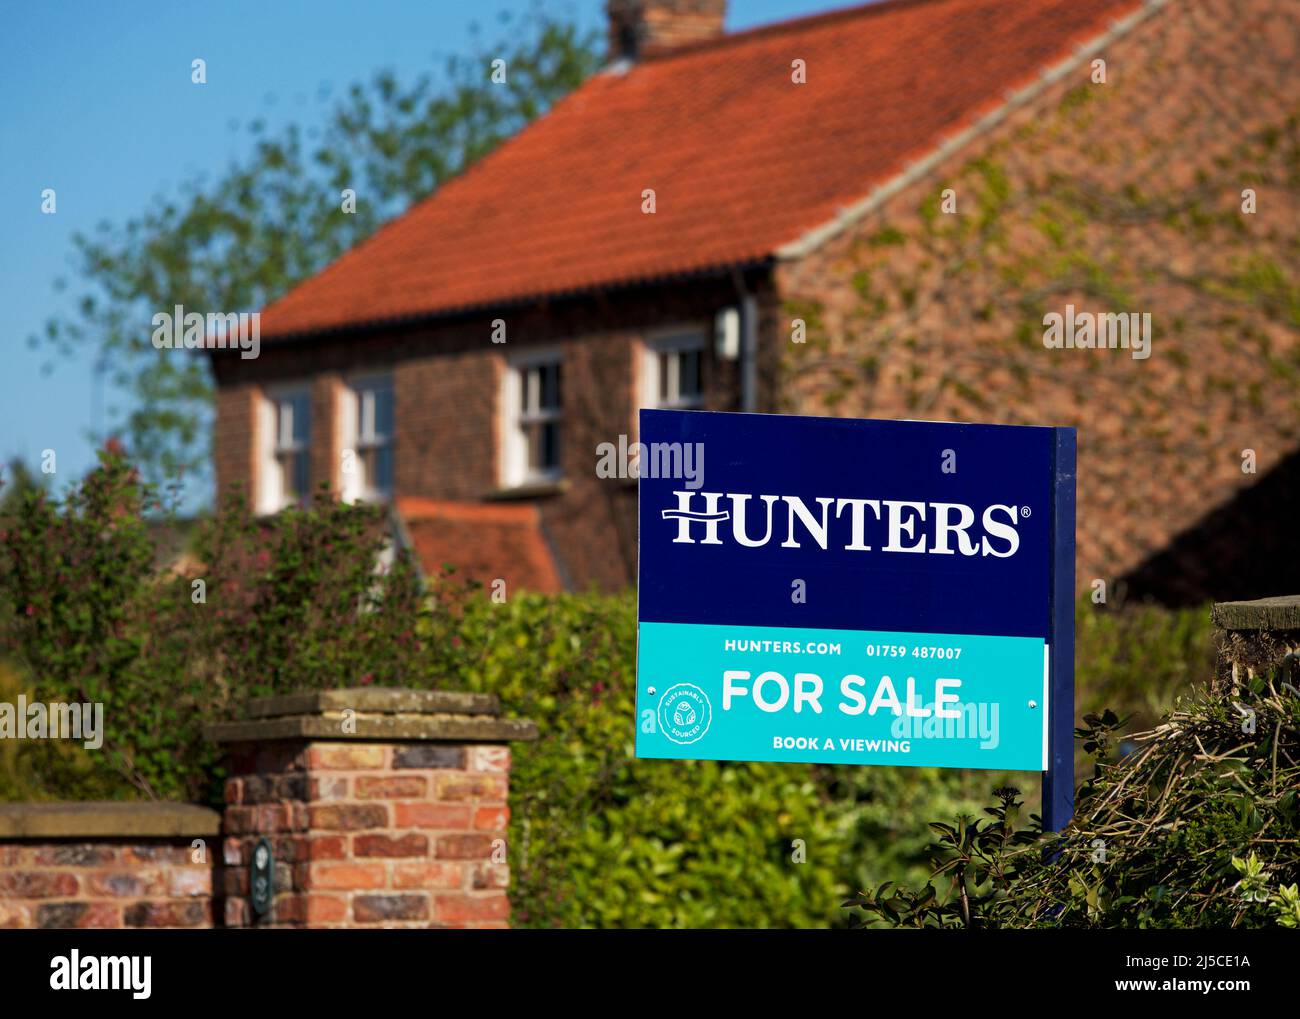 House for sale sign, erected by Hunters estate agents, Yorkshire, England UK Stock Photo